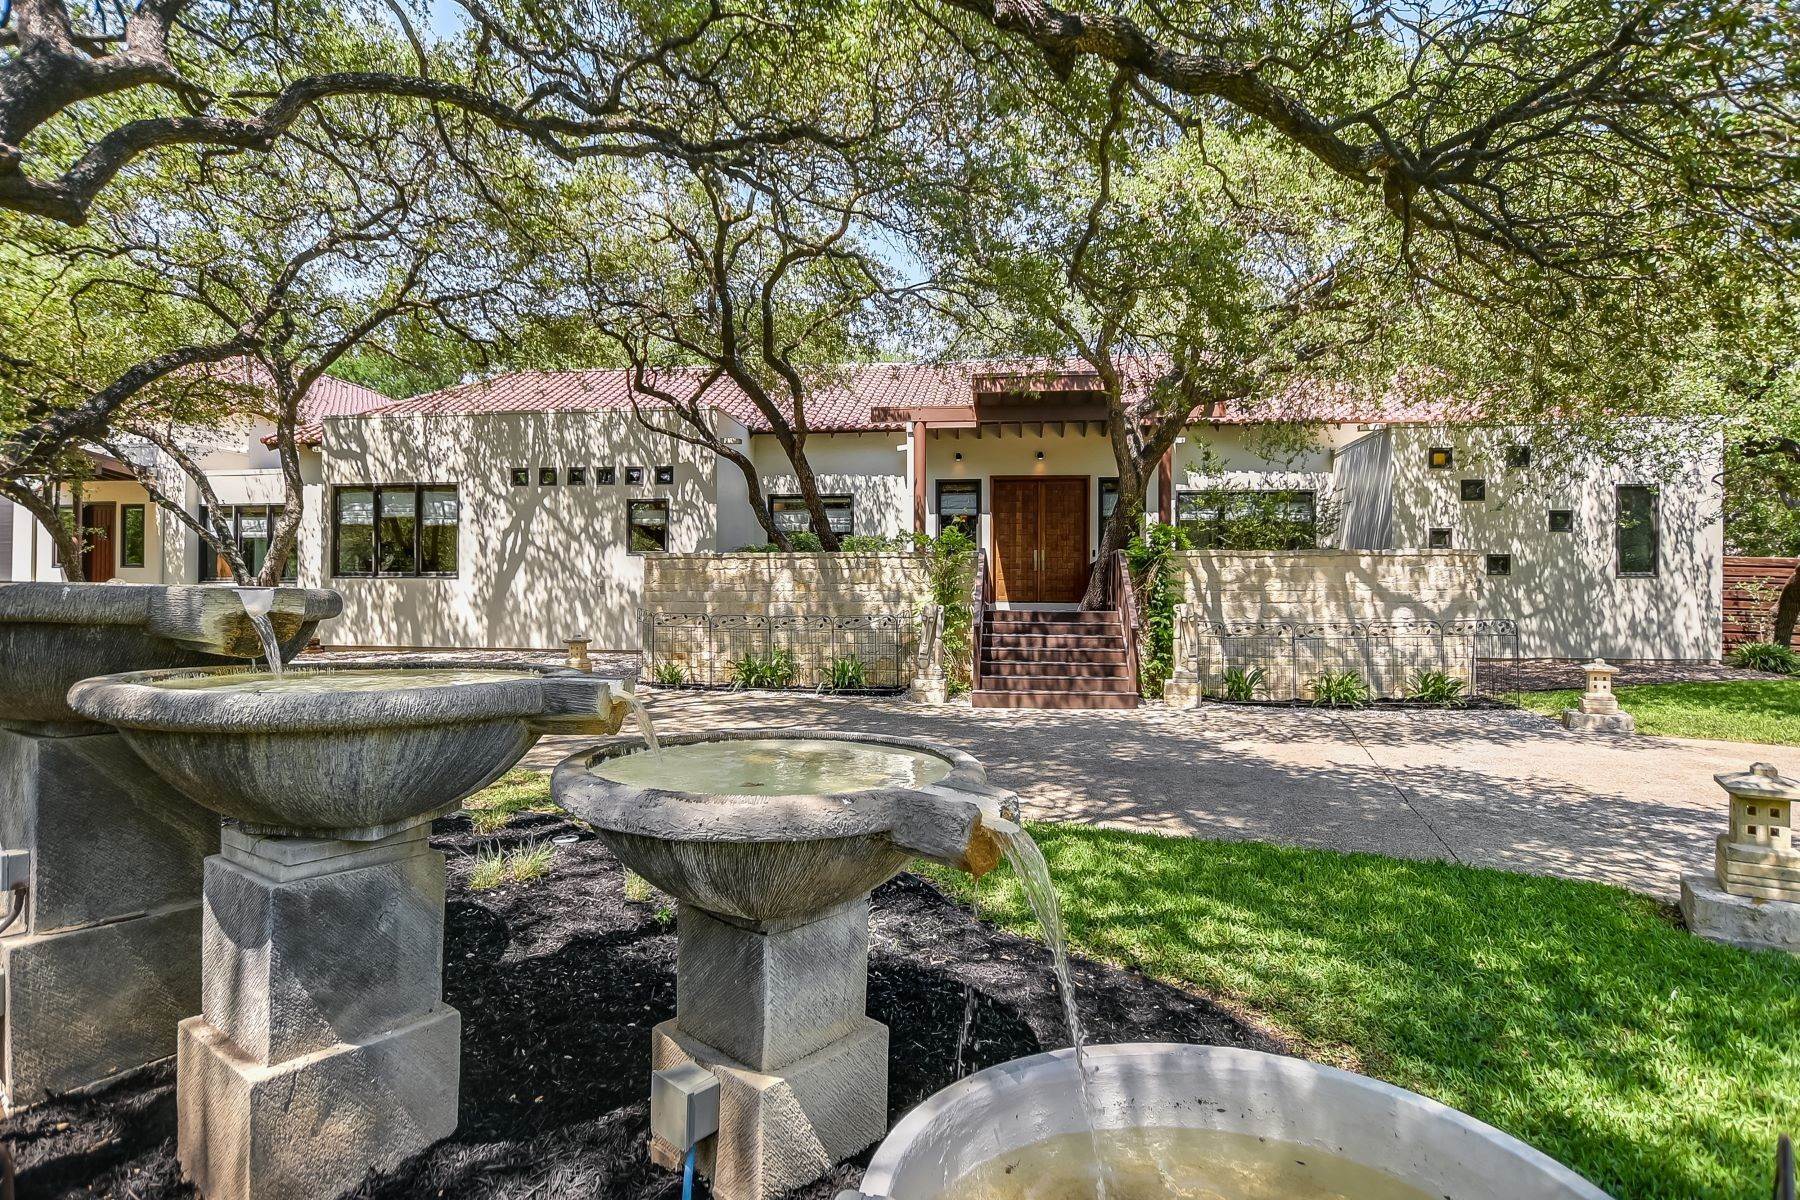 Property for Sale at 117 Fox Hall Lane, Castle Hills, TX 78213 117 Fox Hall Lane Castle Hills, Texas 78213 United States